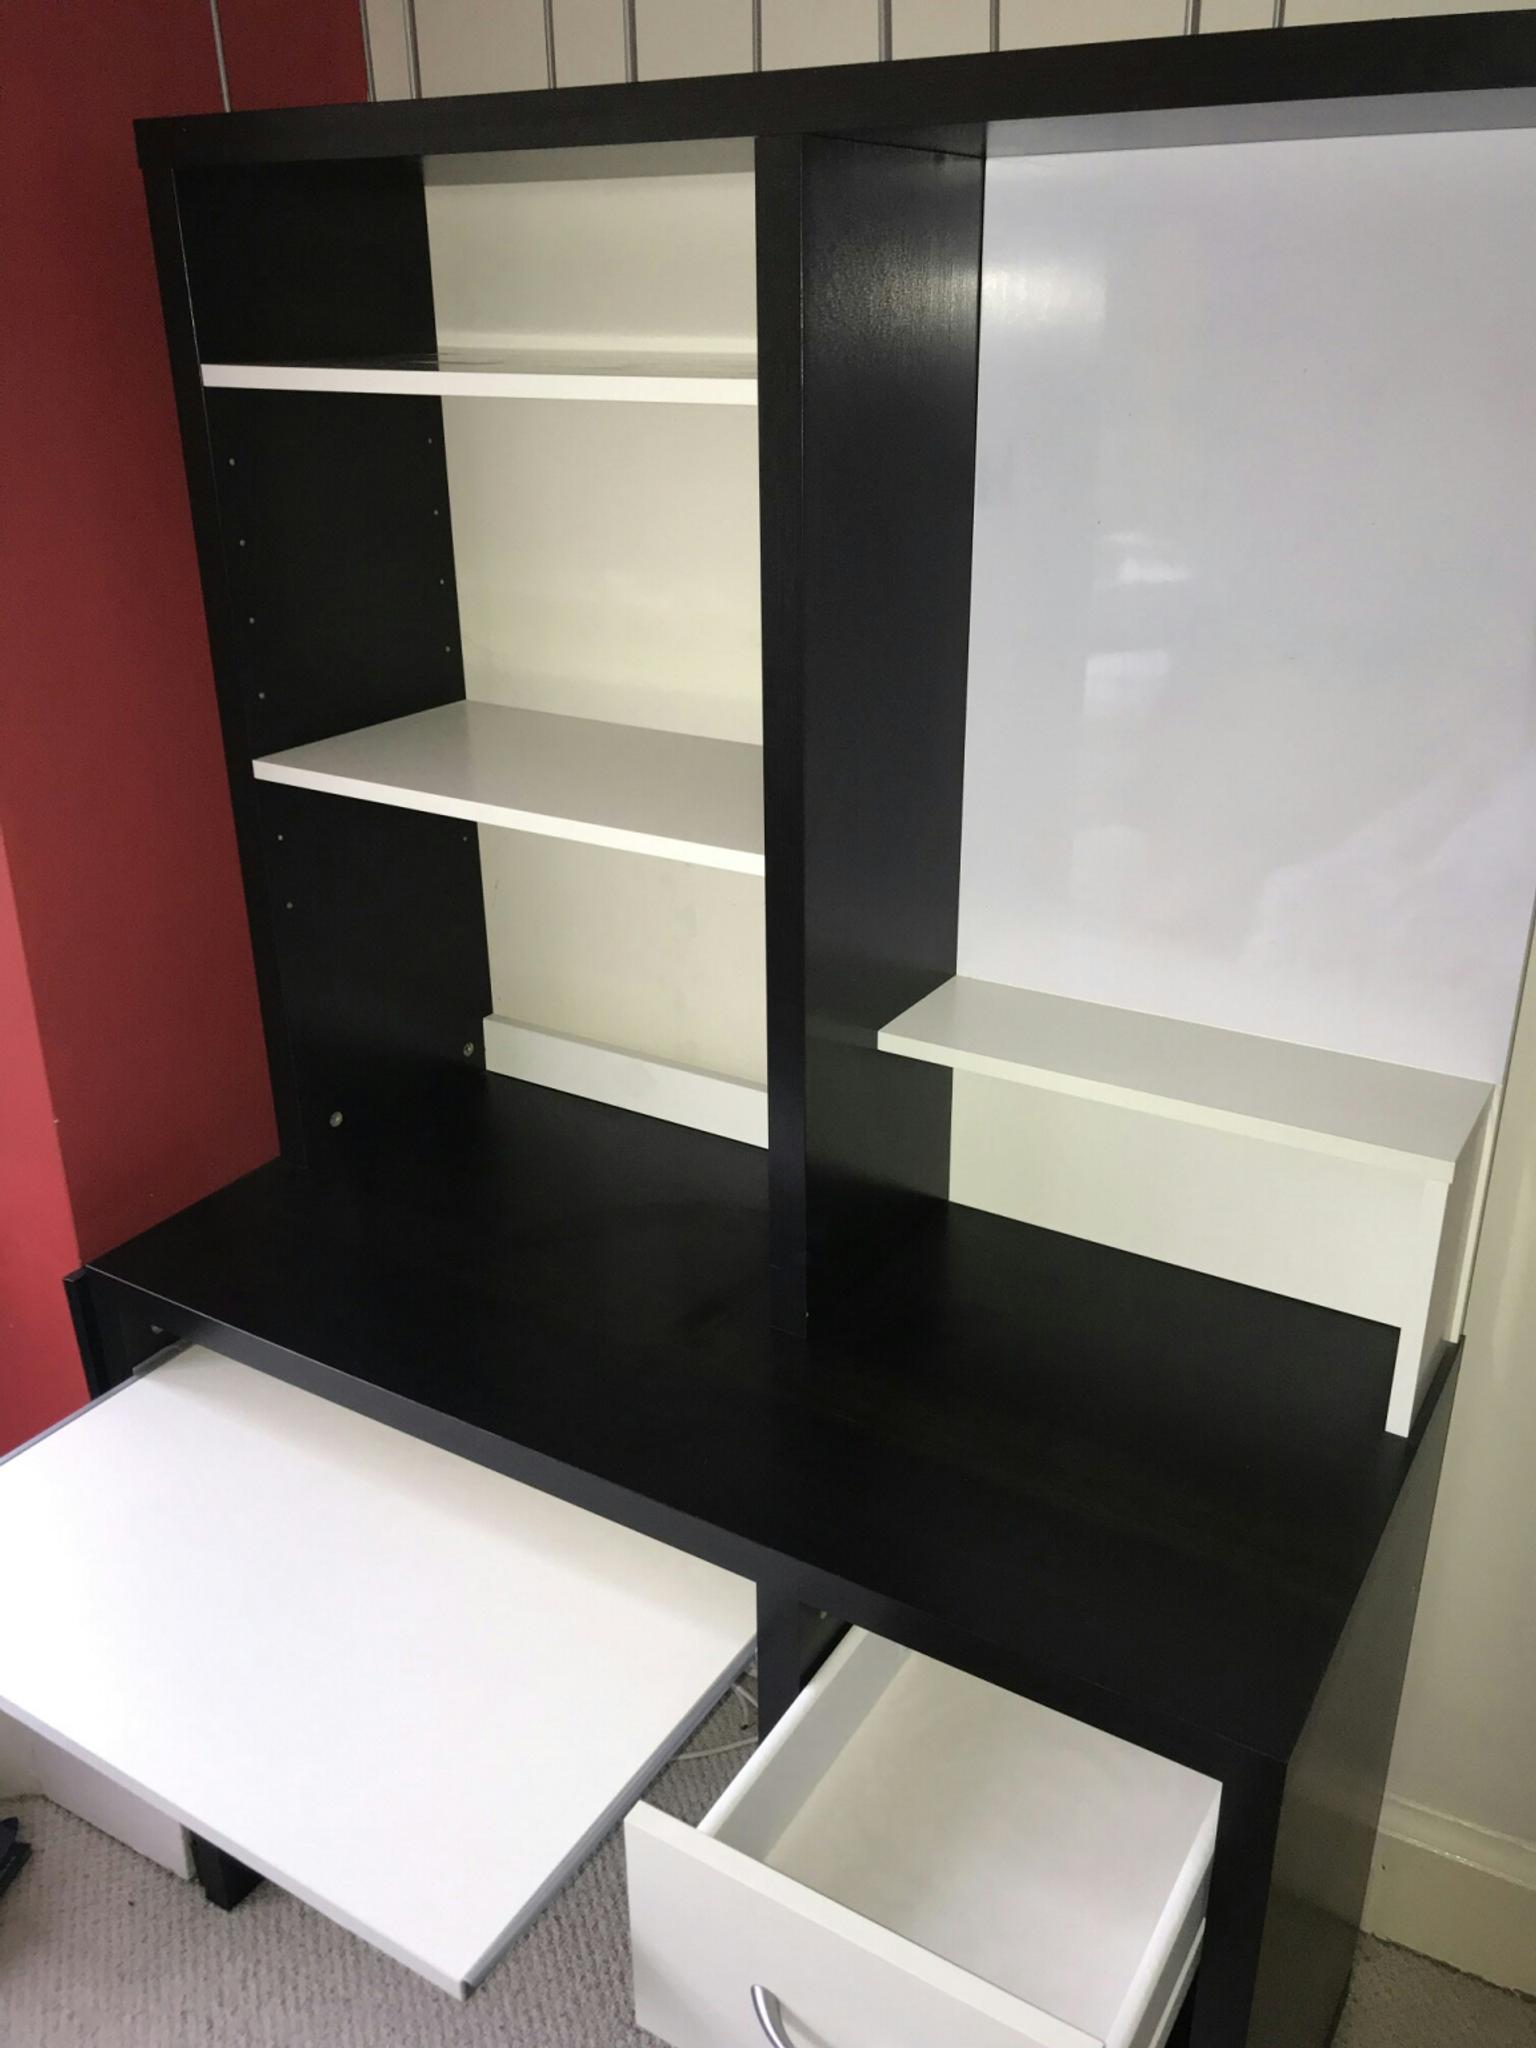 Ikea Study Desk Drawers And Shelves In Cv5 Coventry Fur 55 00